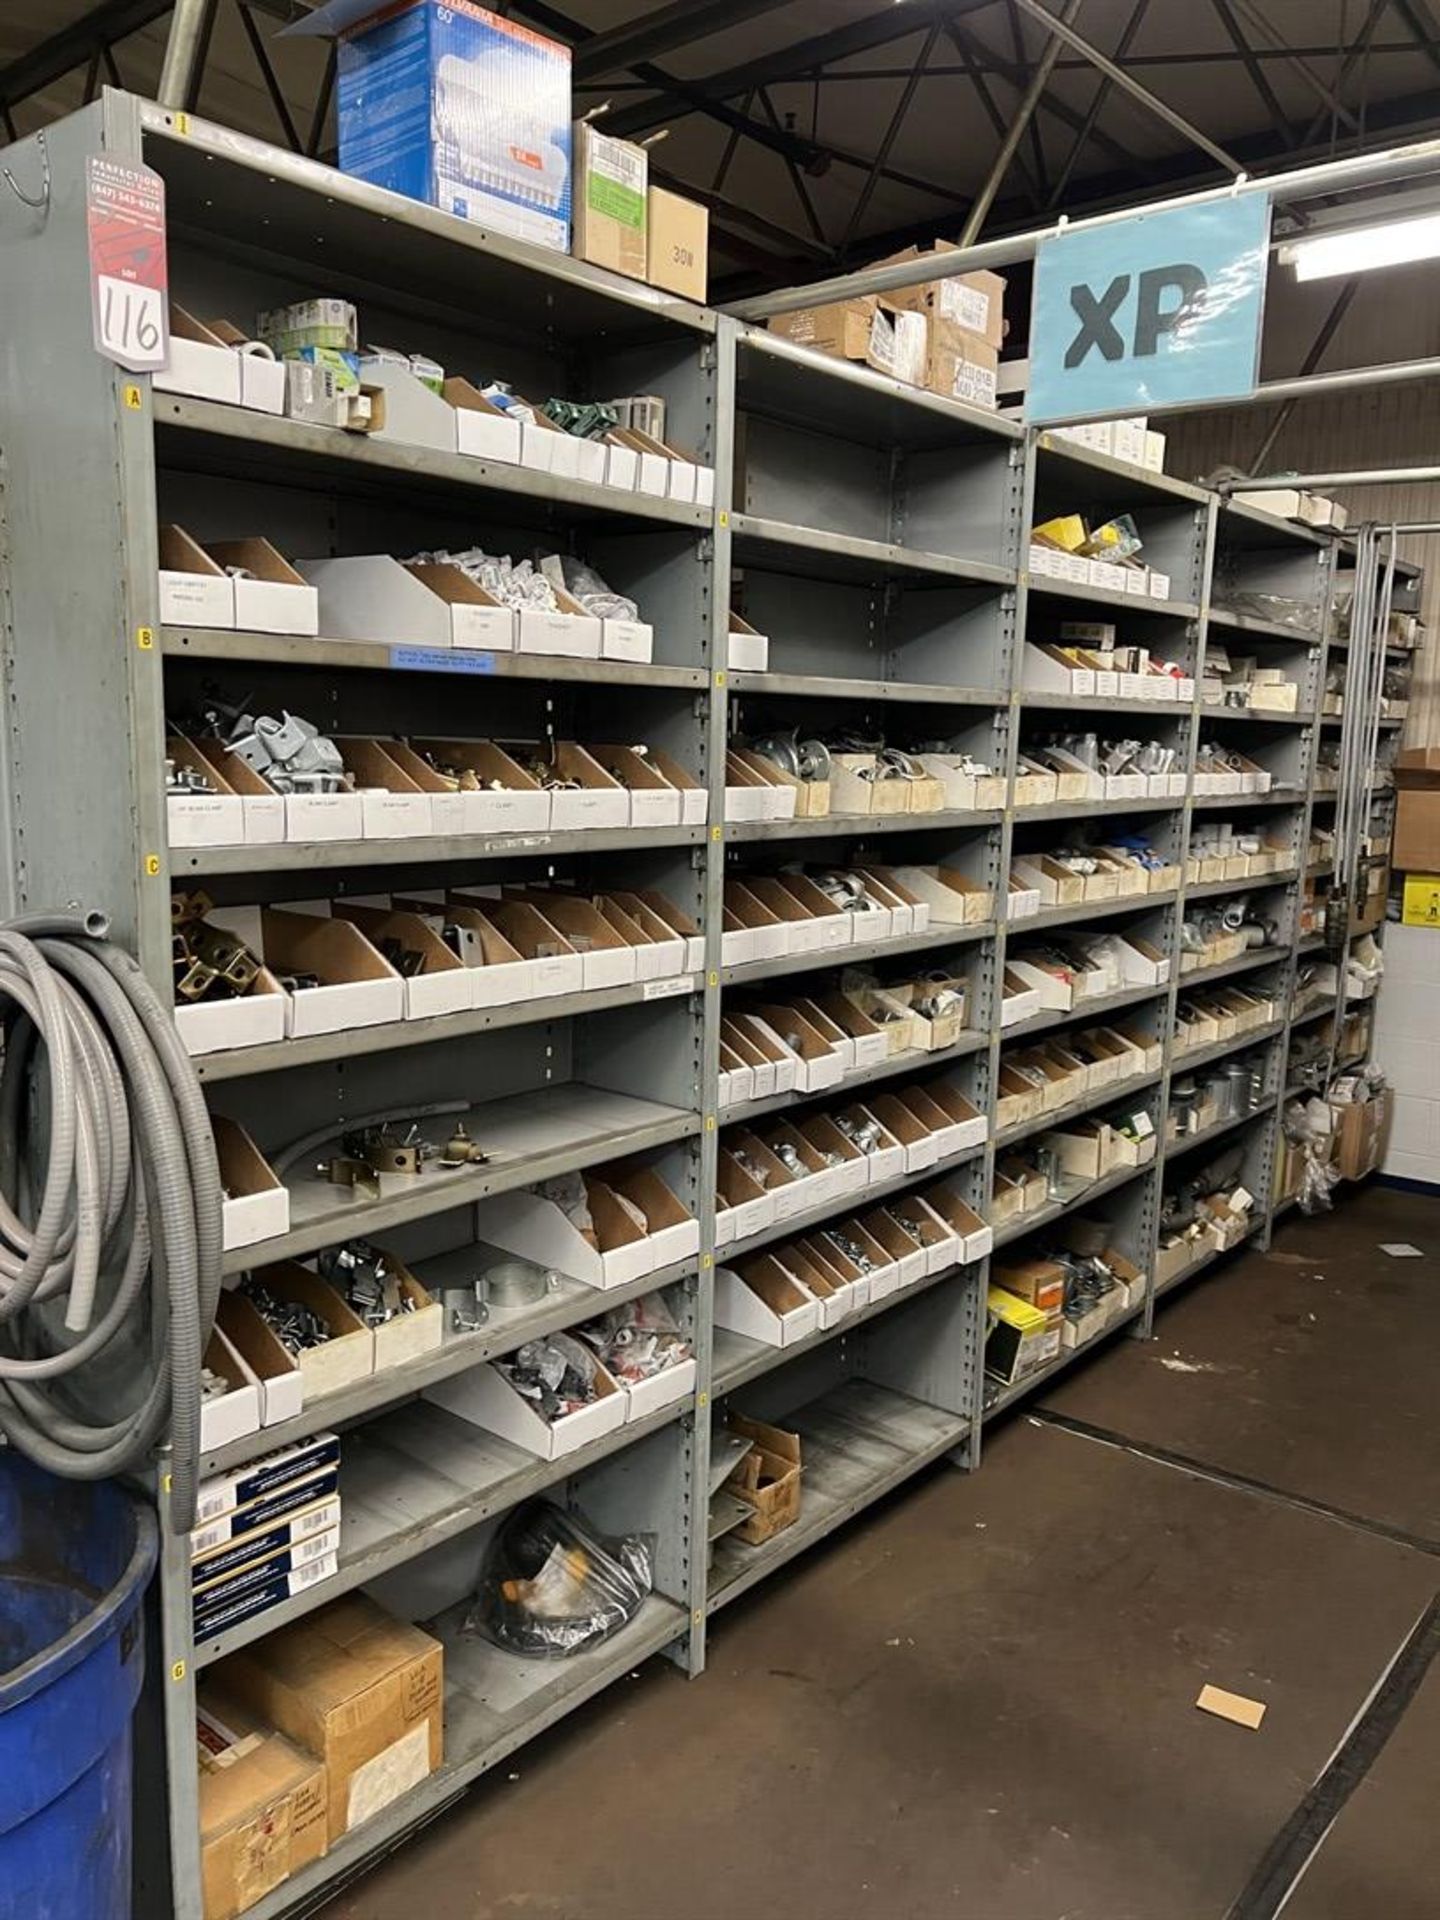 Maintenance Crib- Row of Shop Shelving w/ Contents Including Sockets, Beam Clamps, Liquids Tight and